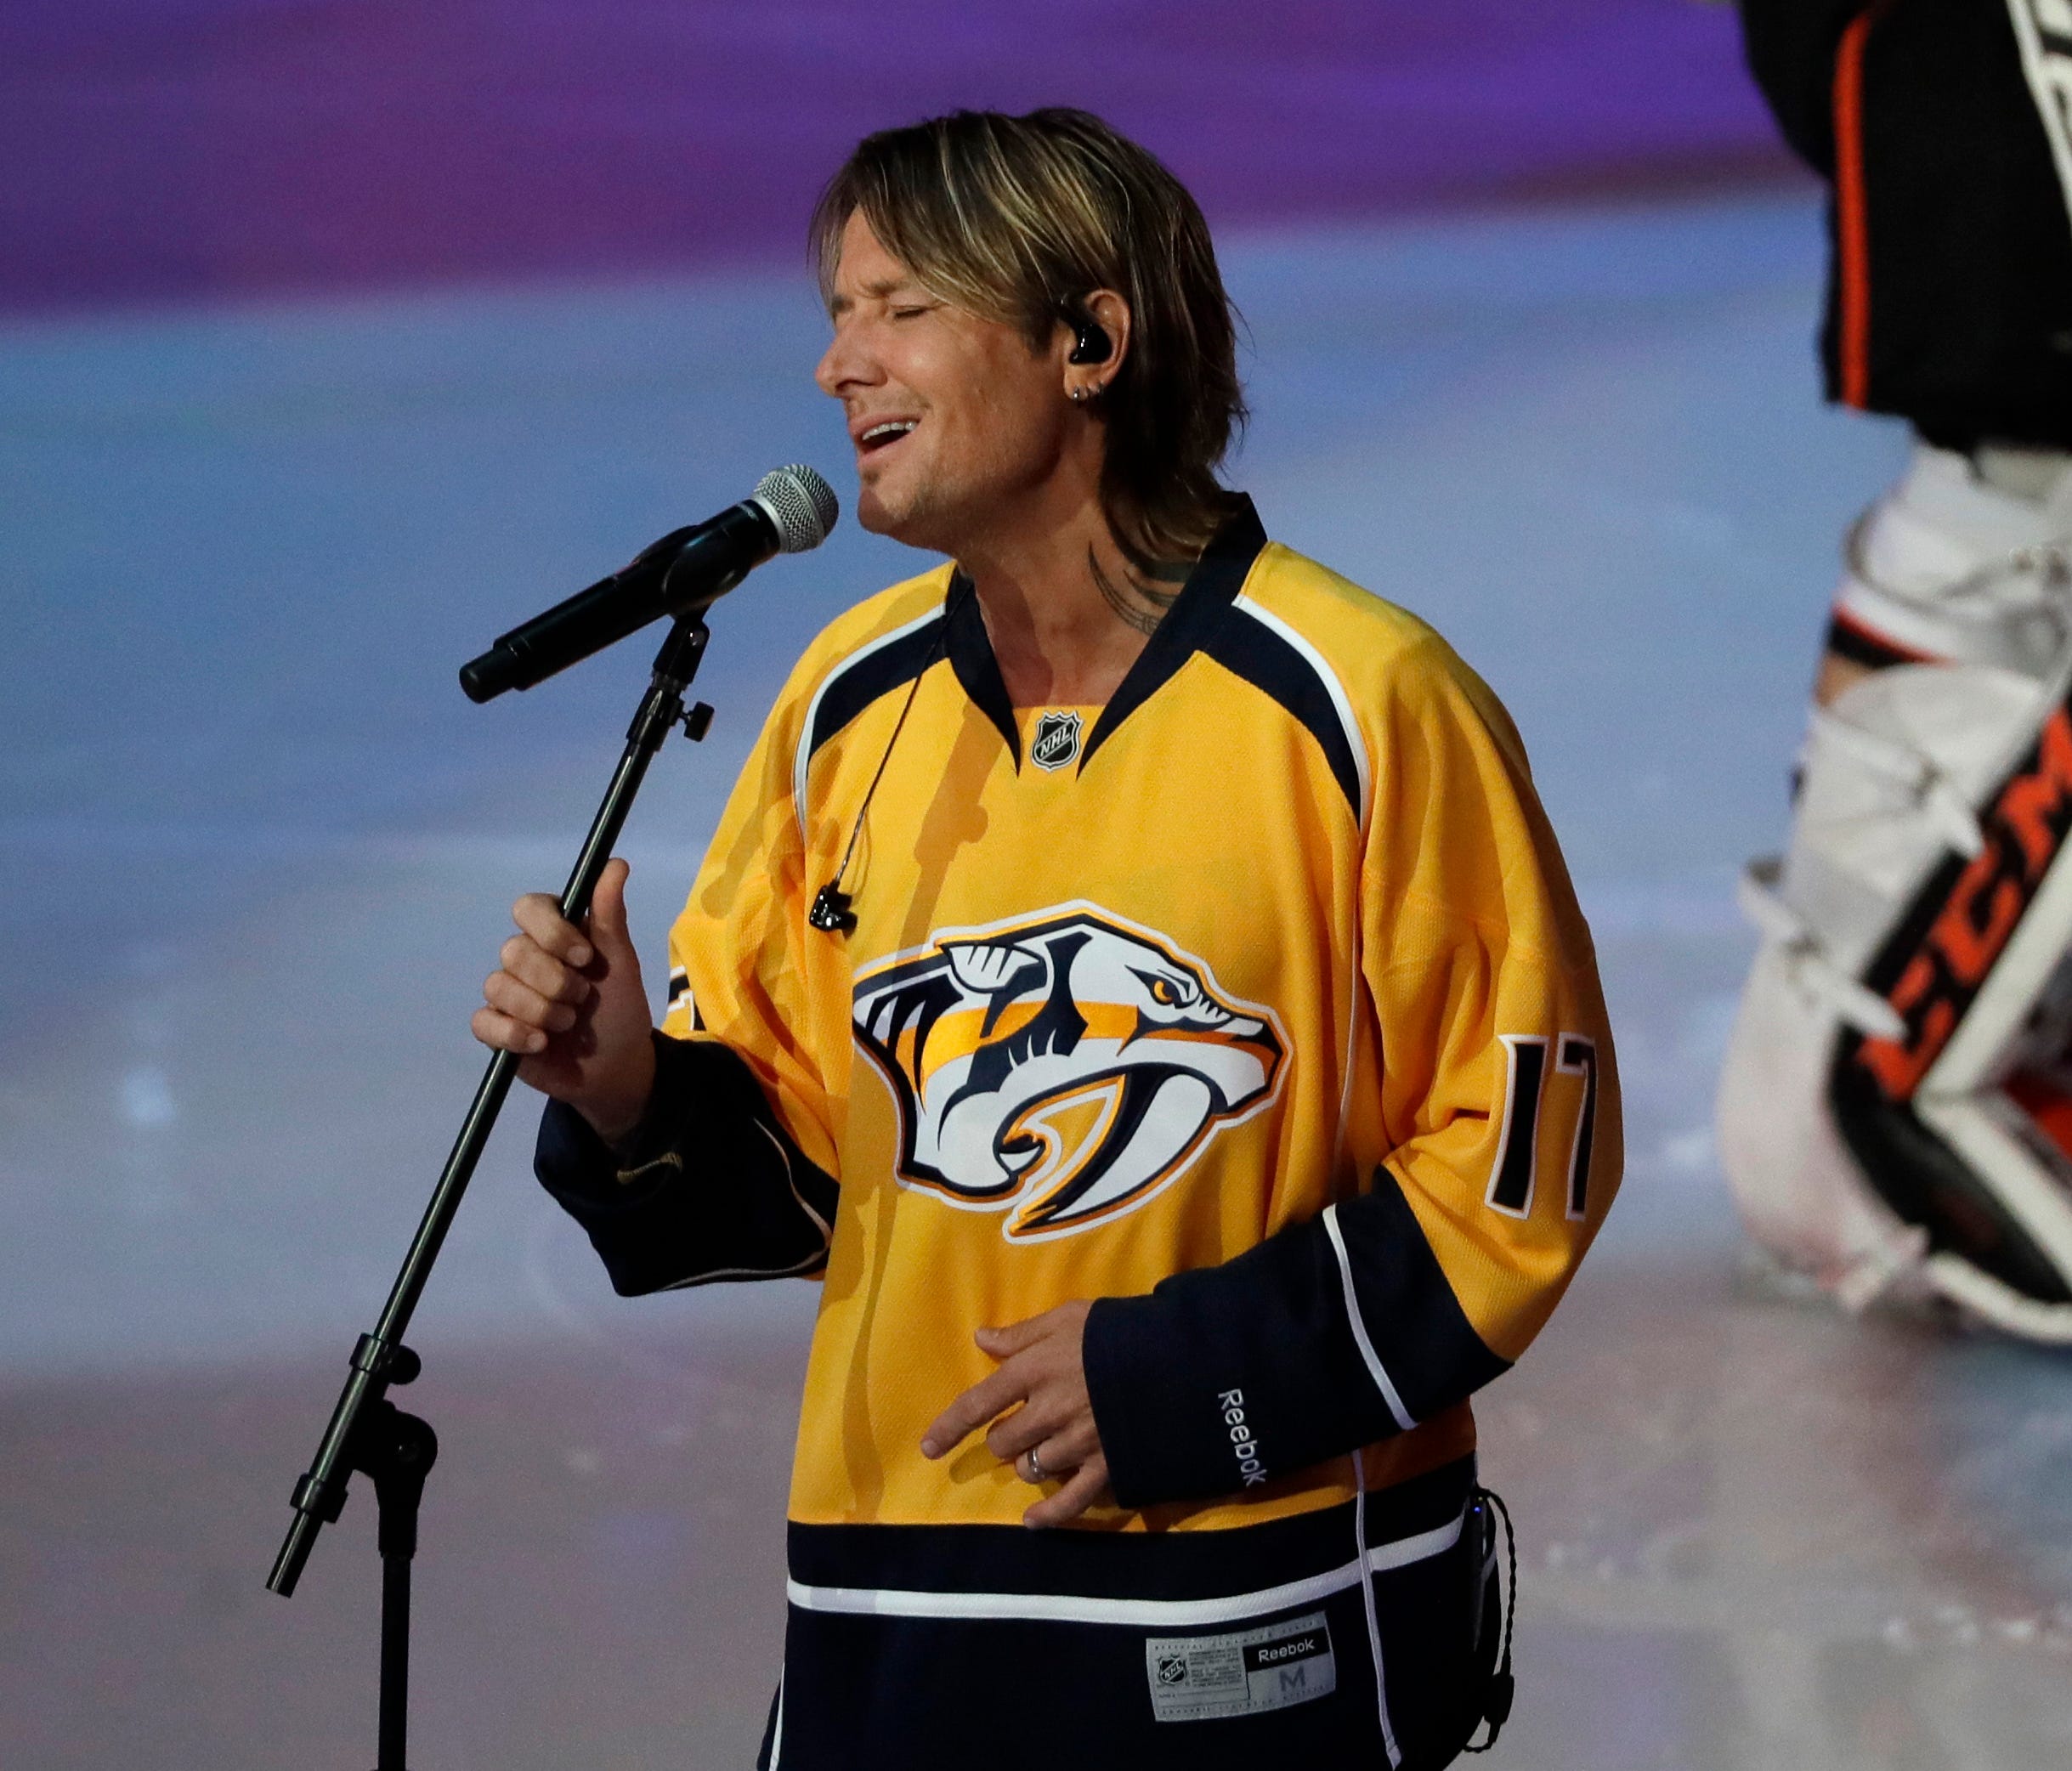 Country Music recording artist Keith Urban sings the national anthem before Game 3 of the Western Conference final series between the Nashville Predators and the Anaheim Ducks.